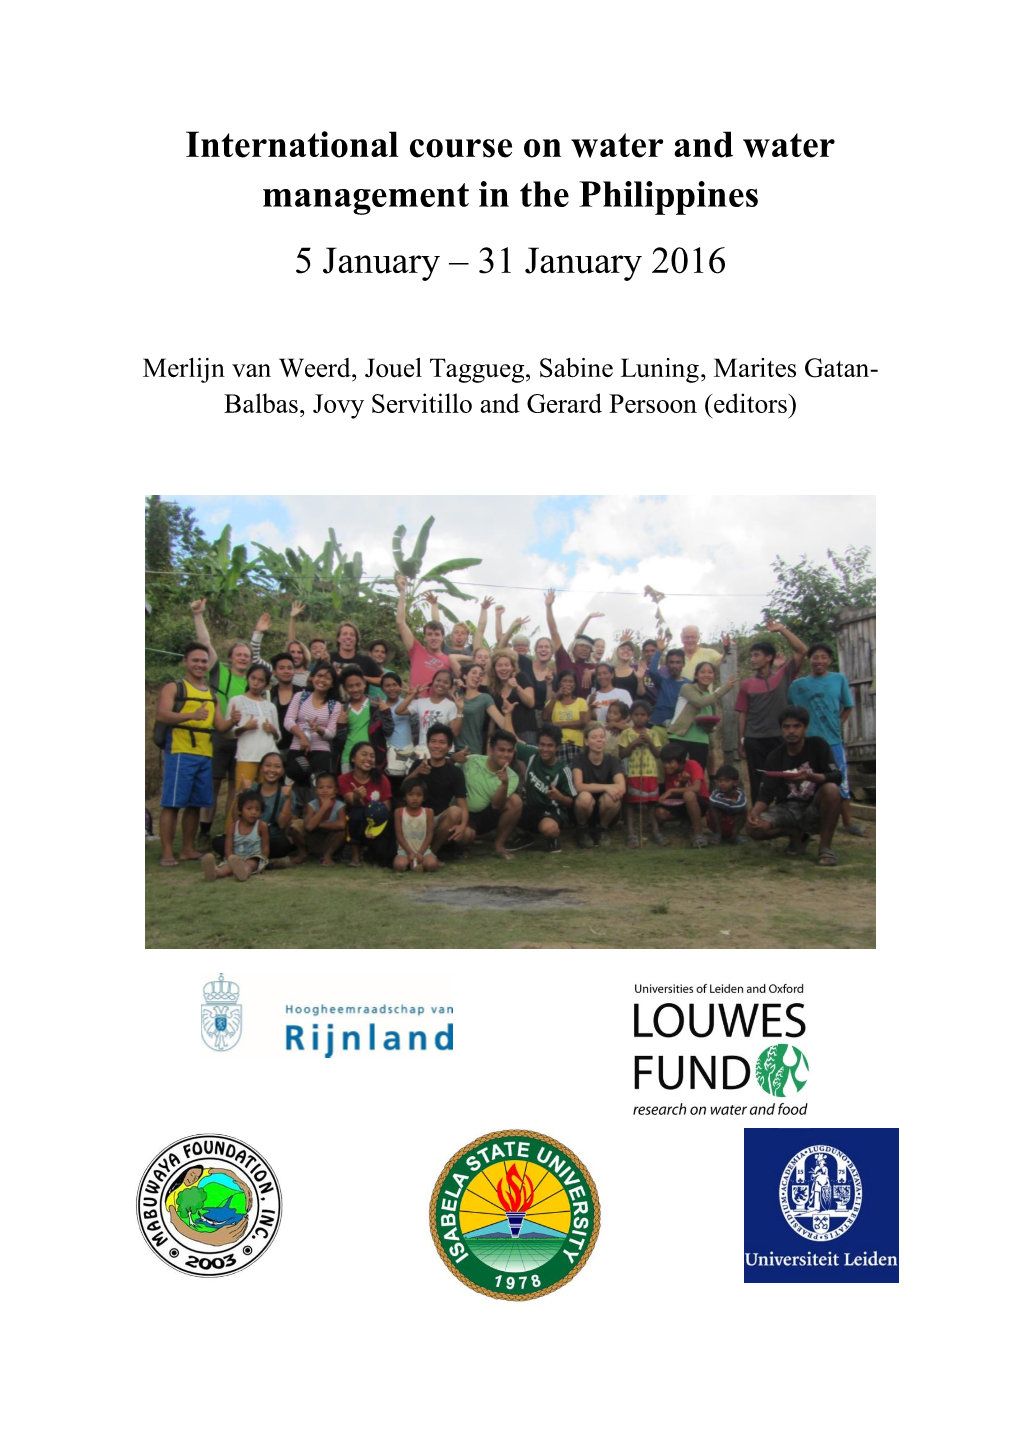 International Course on Water and Water Management in the Philippines 5 January – 31 January 2016